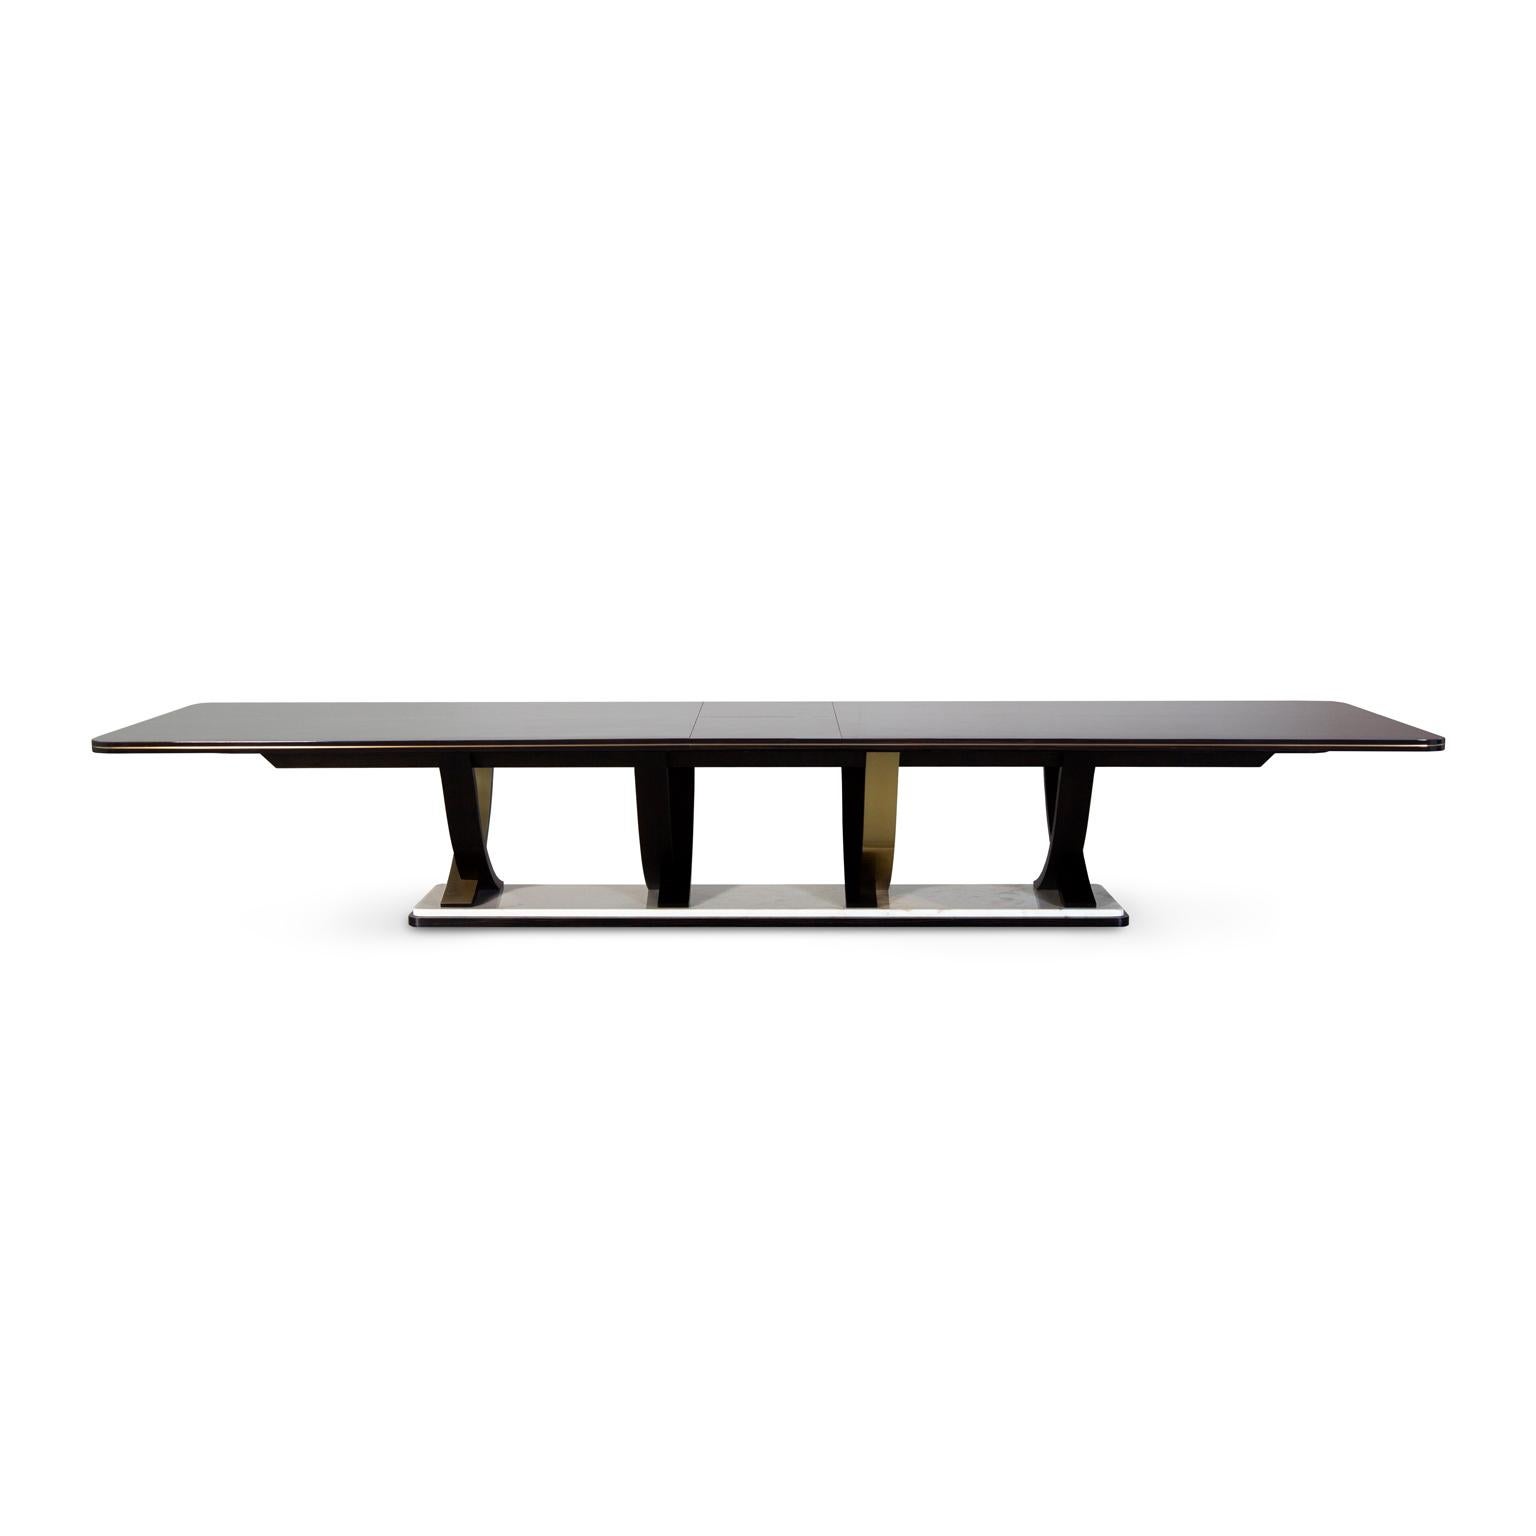 Fontaine Dining Table, Modern Collection, Handcrafted in Portugal - Europe by GF Modern.

The Fontaine dining table is named after Jean de La Fontaine, a French poet and fabulist, reflecting the Art Deco style that symbolizes the dawn of a new